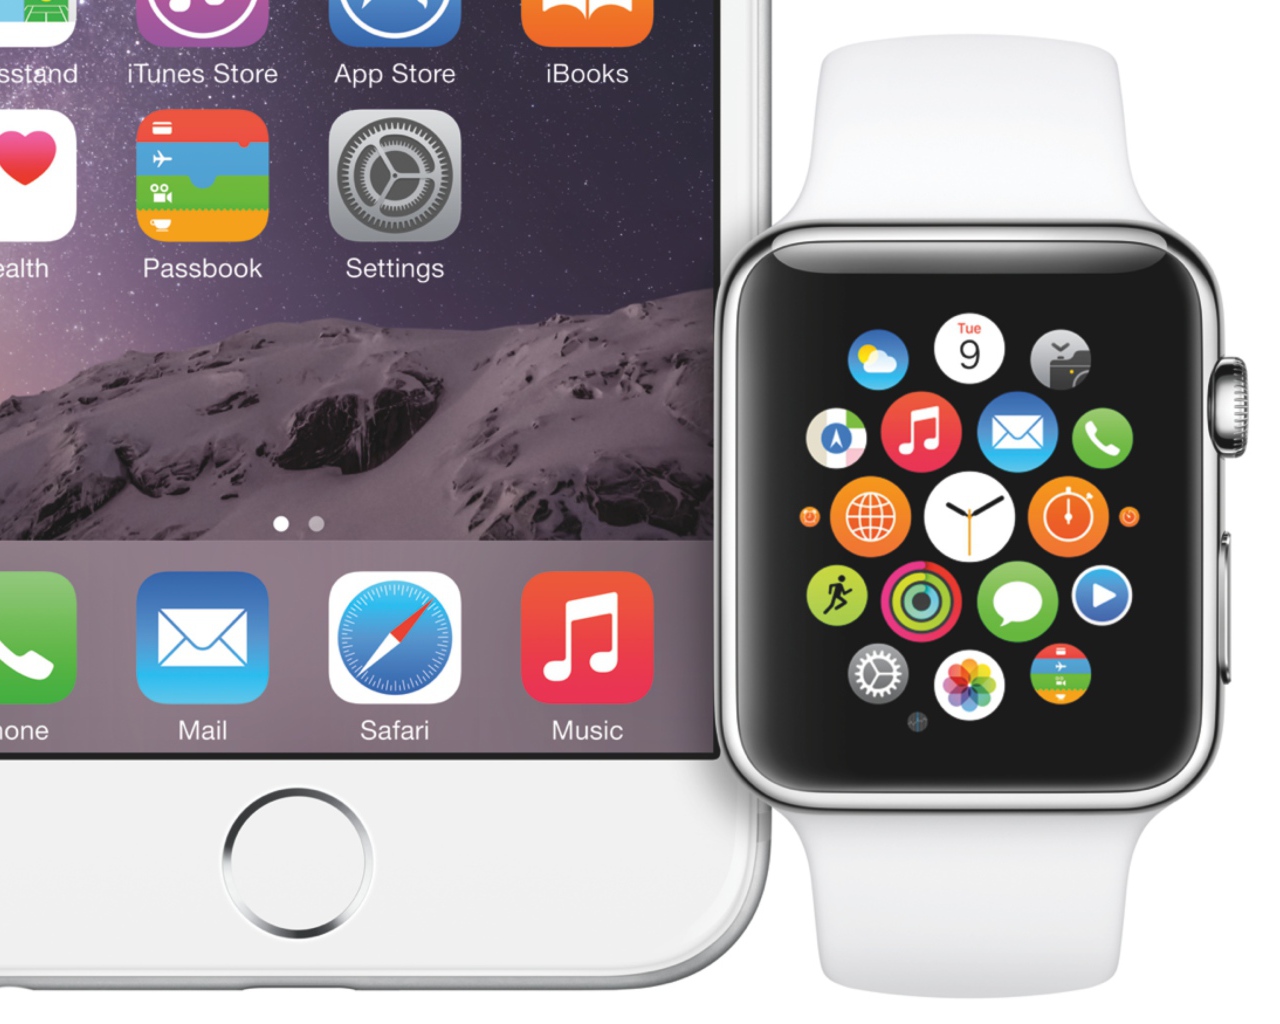 Apple Watch in comparison with a smartphone